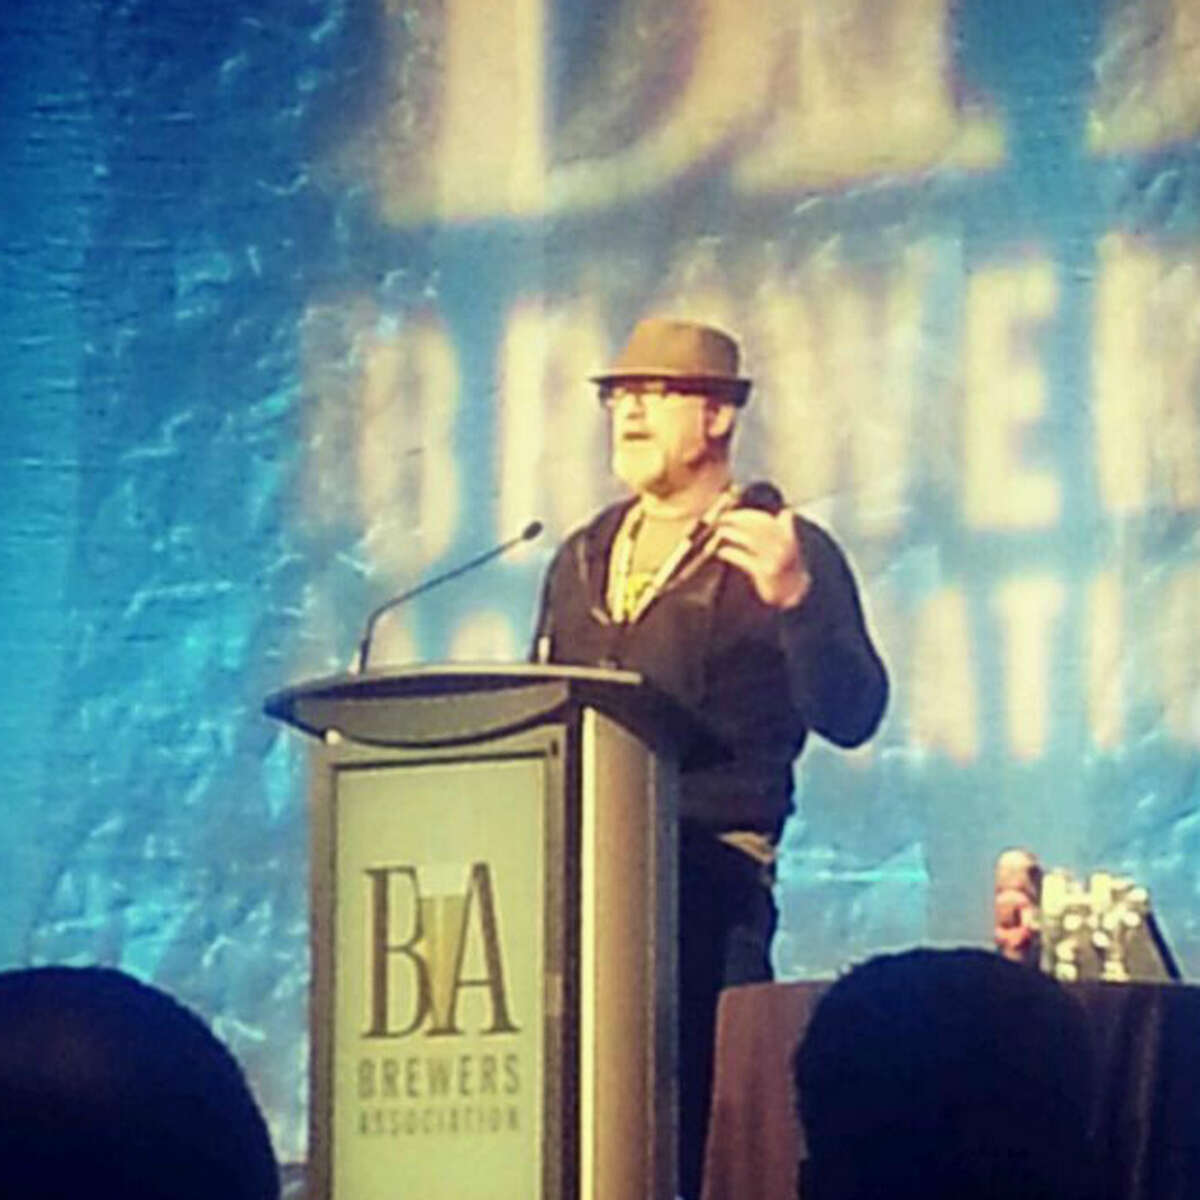 Ron Extract of Austin-based Jester King Brewery accepts the F.X. Matt Defense of the Small Brewing Industry Award for 2014 from the Brewers Association at the 2014 Craft Brewers Conference in Denver, Colo., on April 9, 2014.